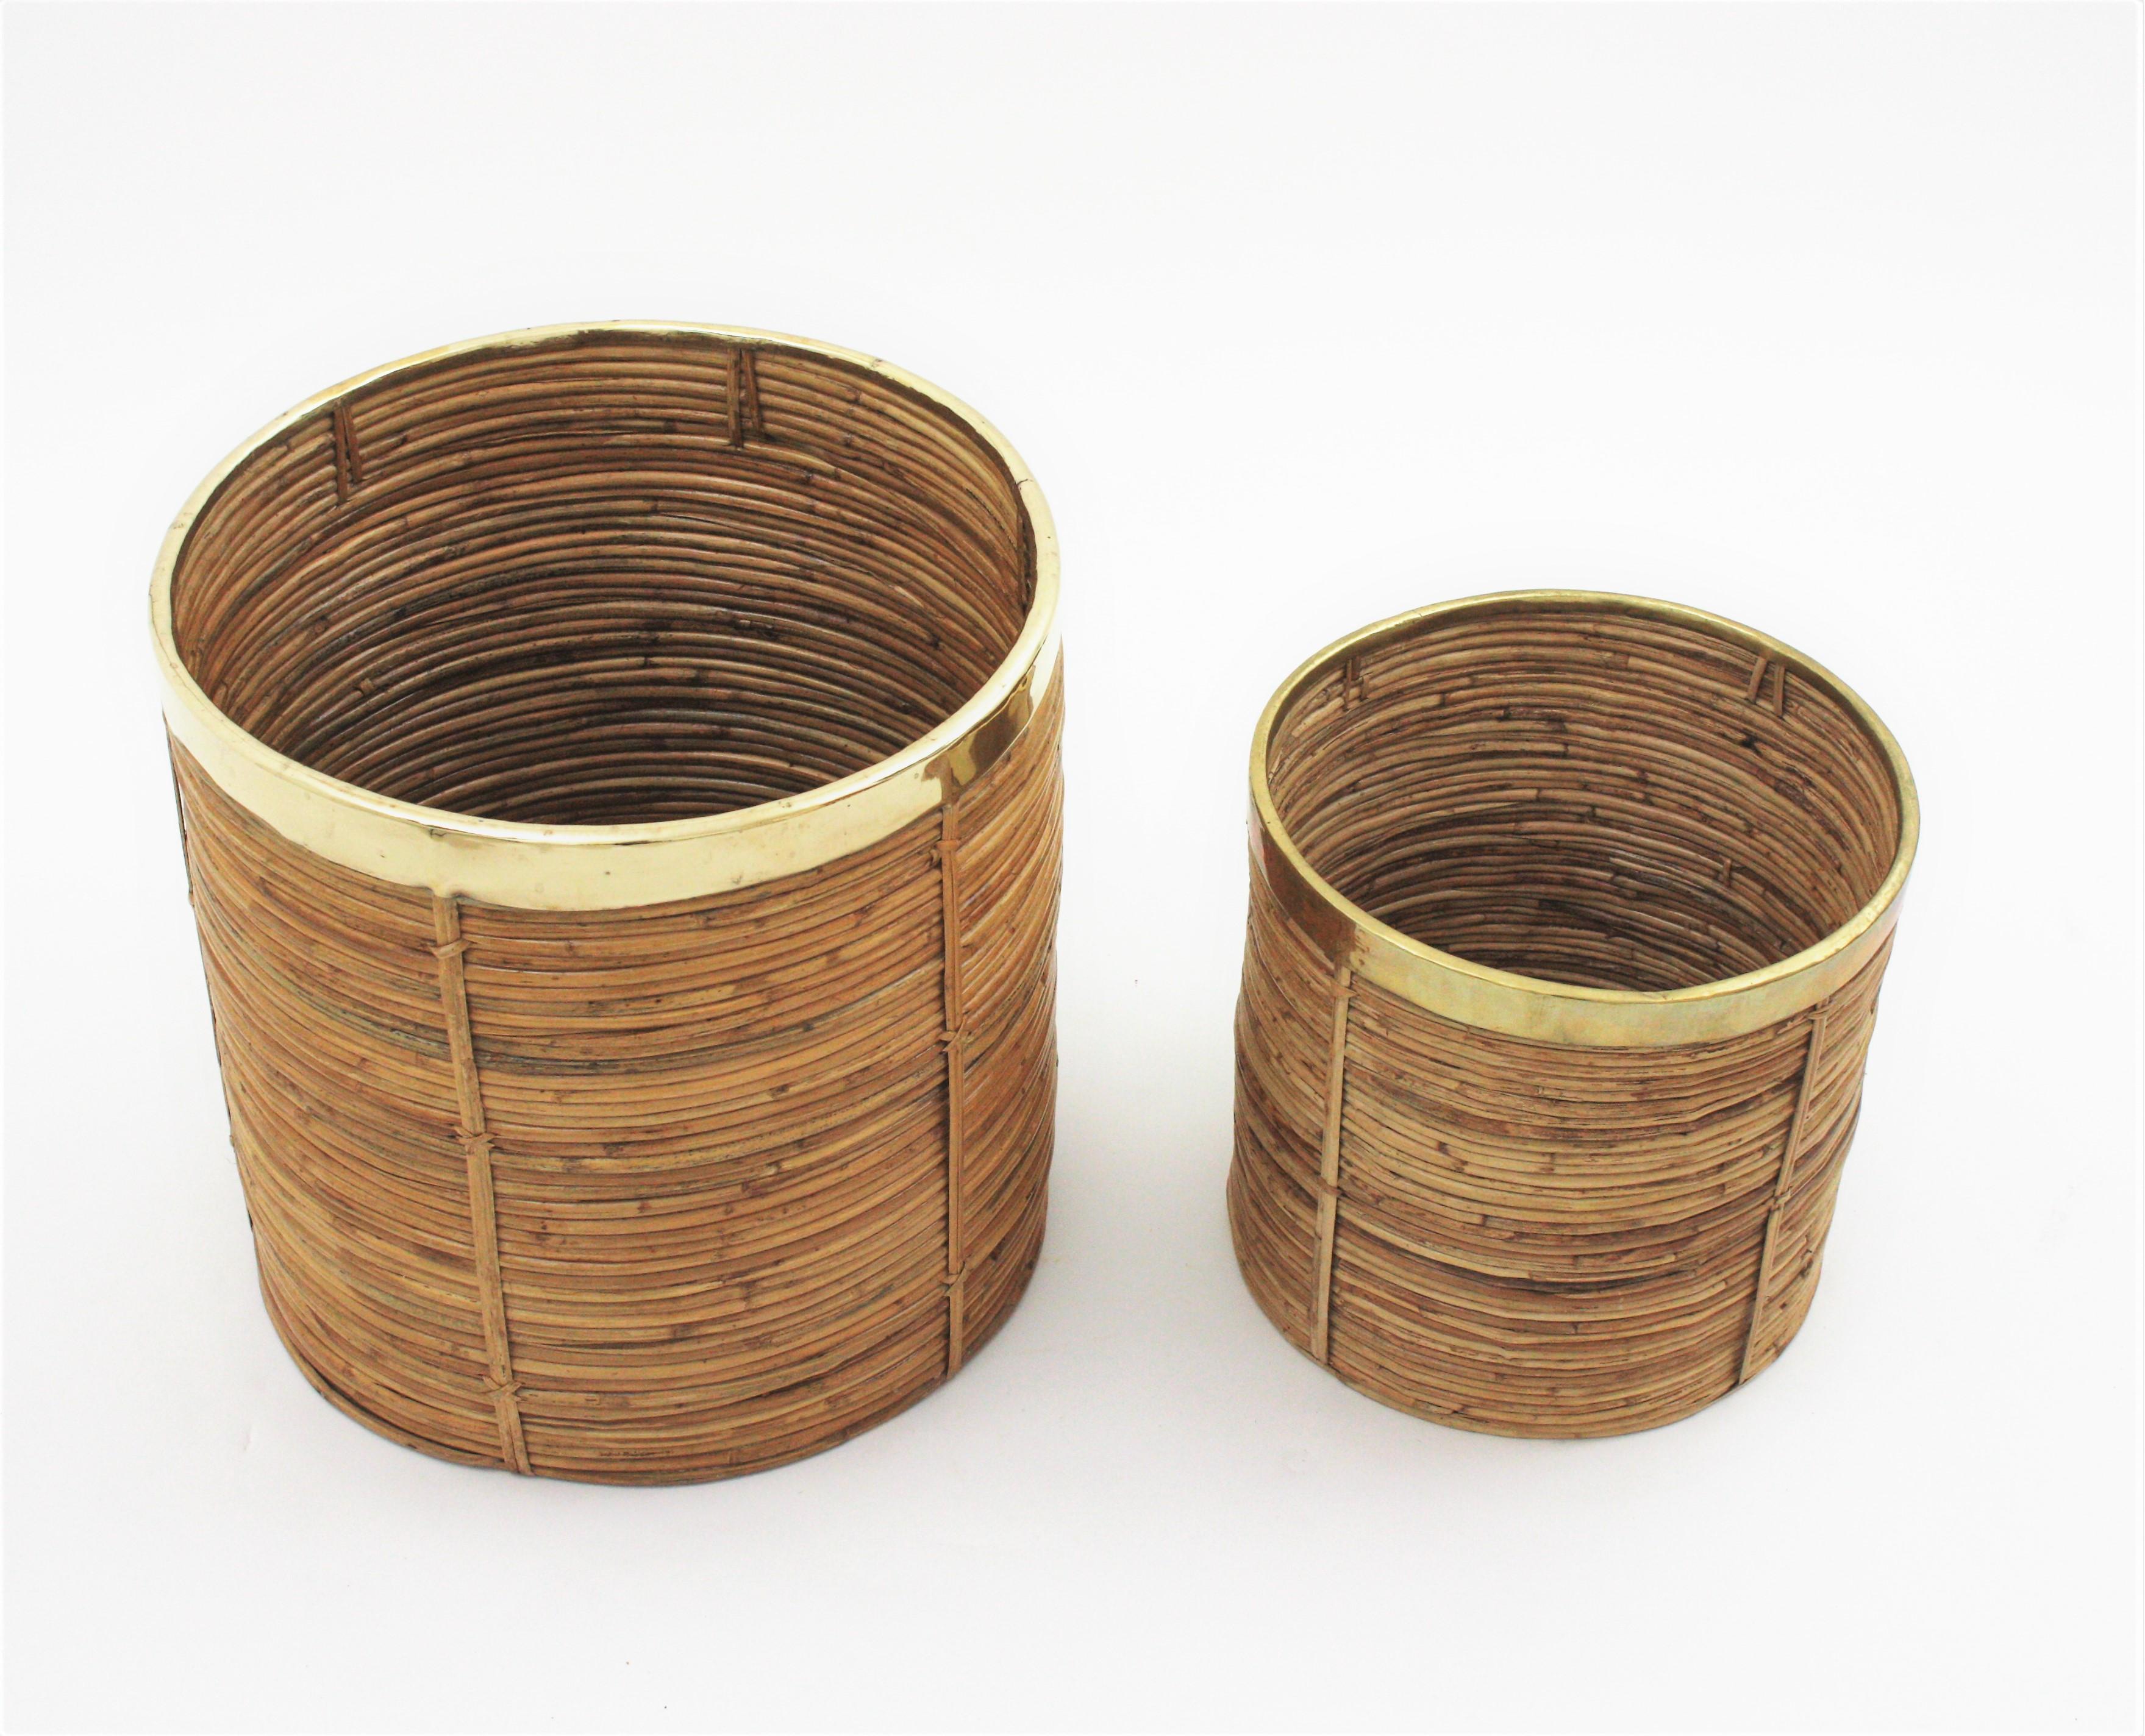 Hand-Crafted Pair of Mid-Century Brass & Rattan Bamboo Round Planters or Baskets, 1970s For Sale